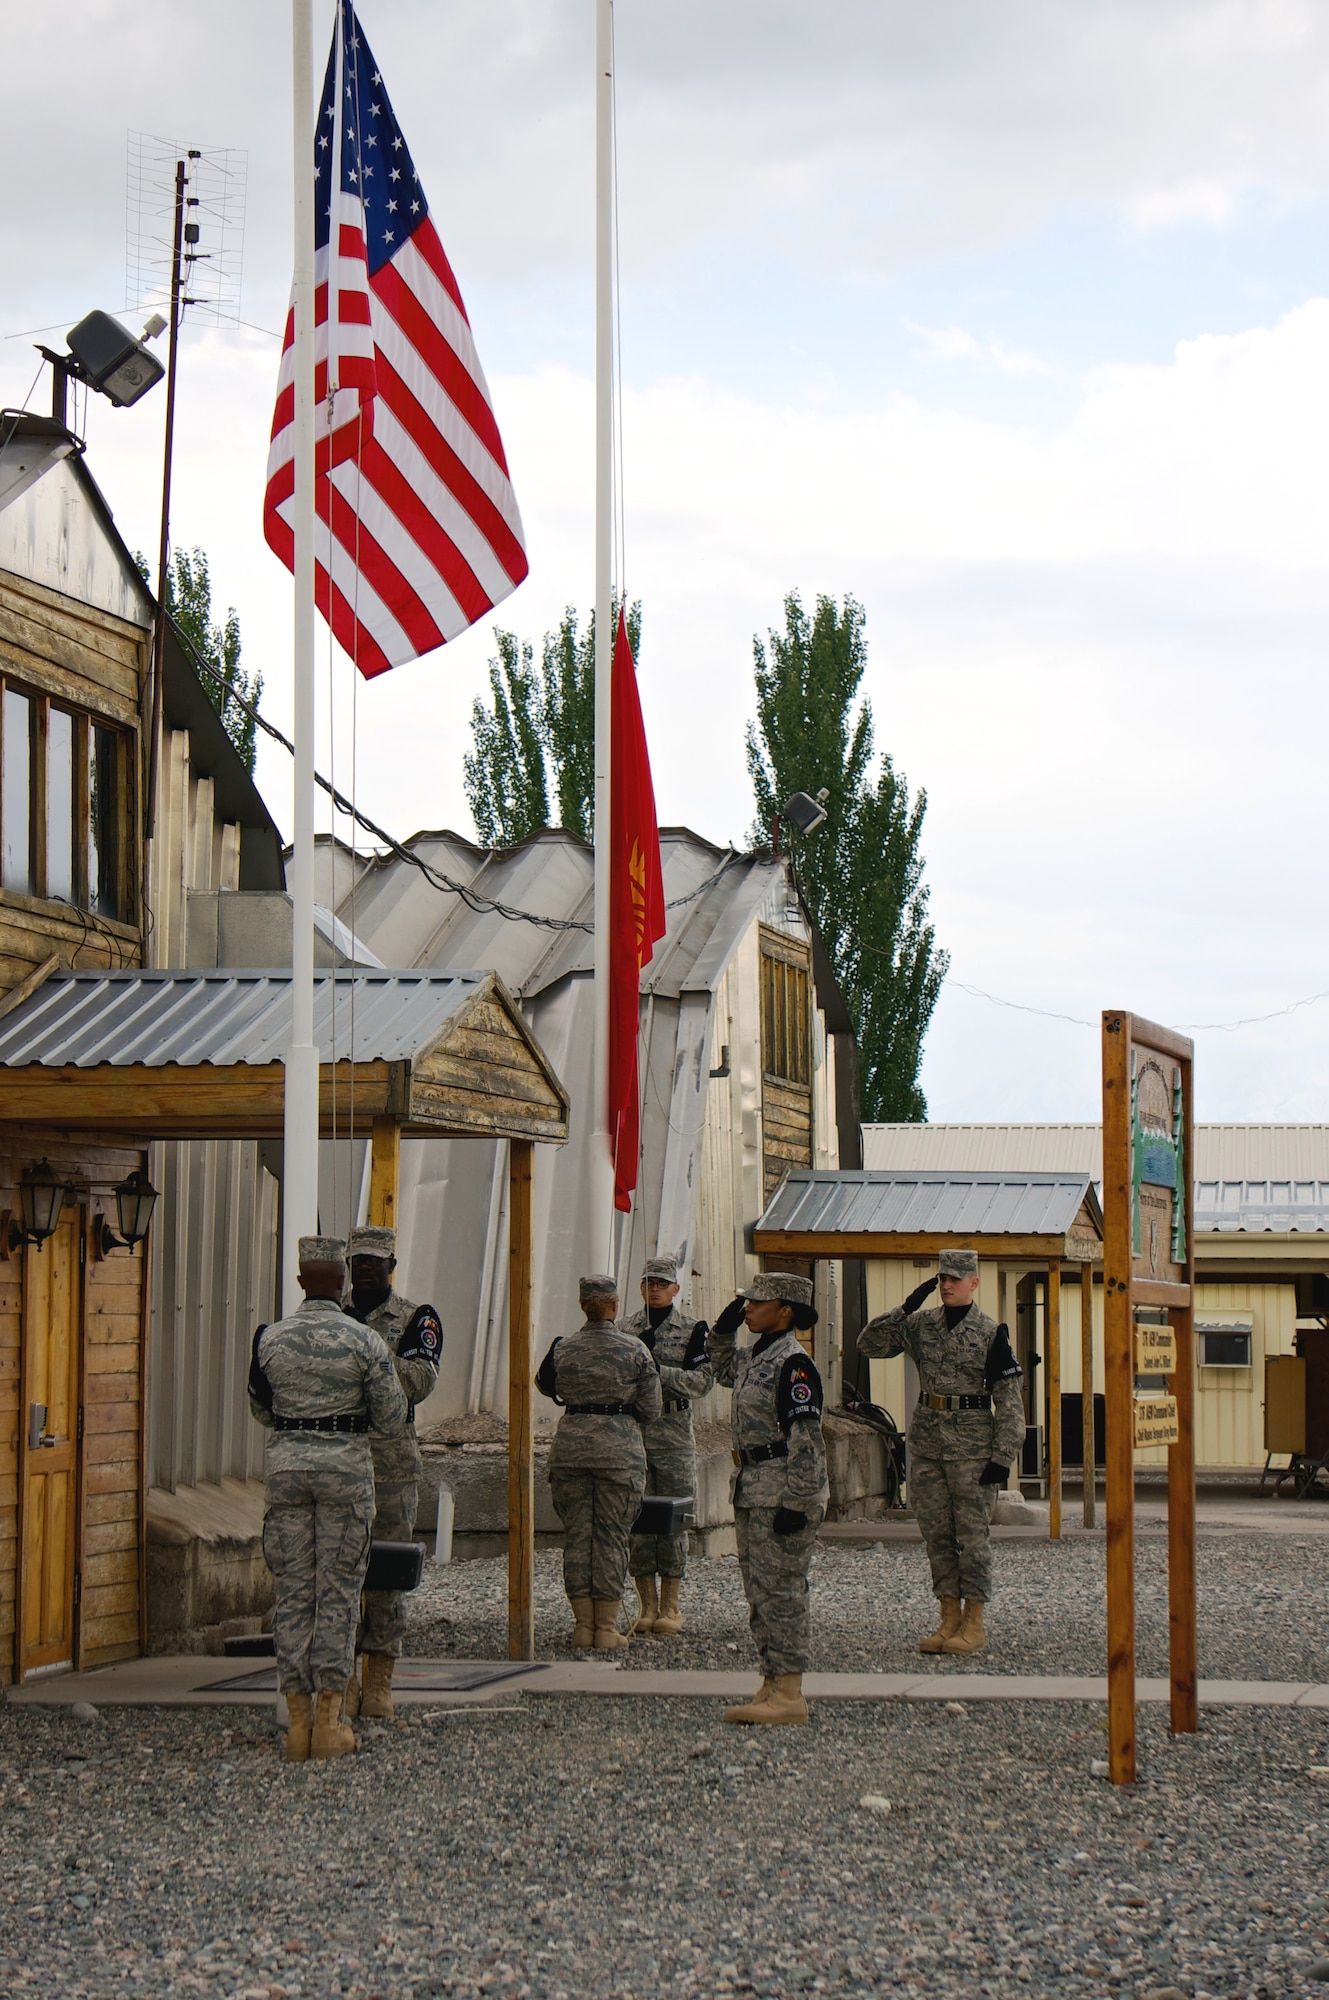 Honor Guard Airmen lower the United States and Kyrgyz Republic flags as part of the 376th Air Expeditionary Wing inactivation ceremony June 3, 2014, at transit center at Manas, Kyrgyzstan. Airmen assigned to the Transit Center during its tenure loaded and flew 42,000 airlift missions, hauling 1.4 billion pounds of cargo. (Courtesy photo/Capt. Cory O'Brien)